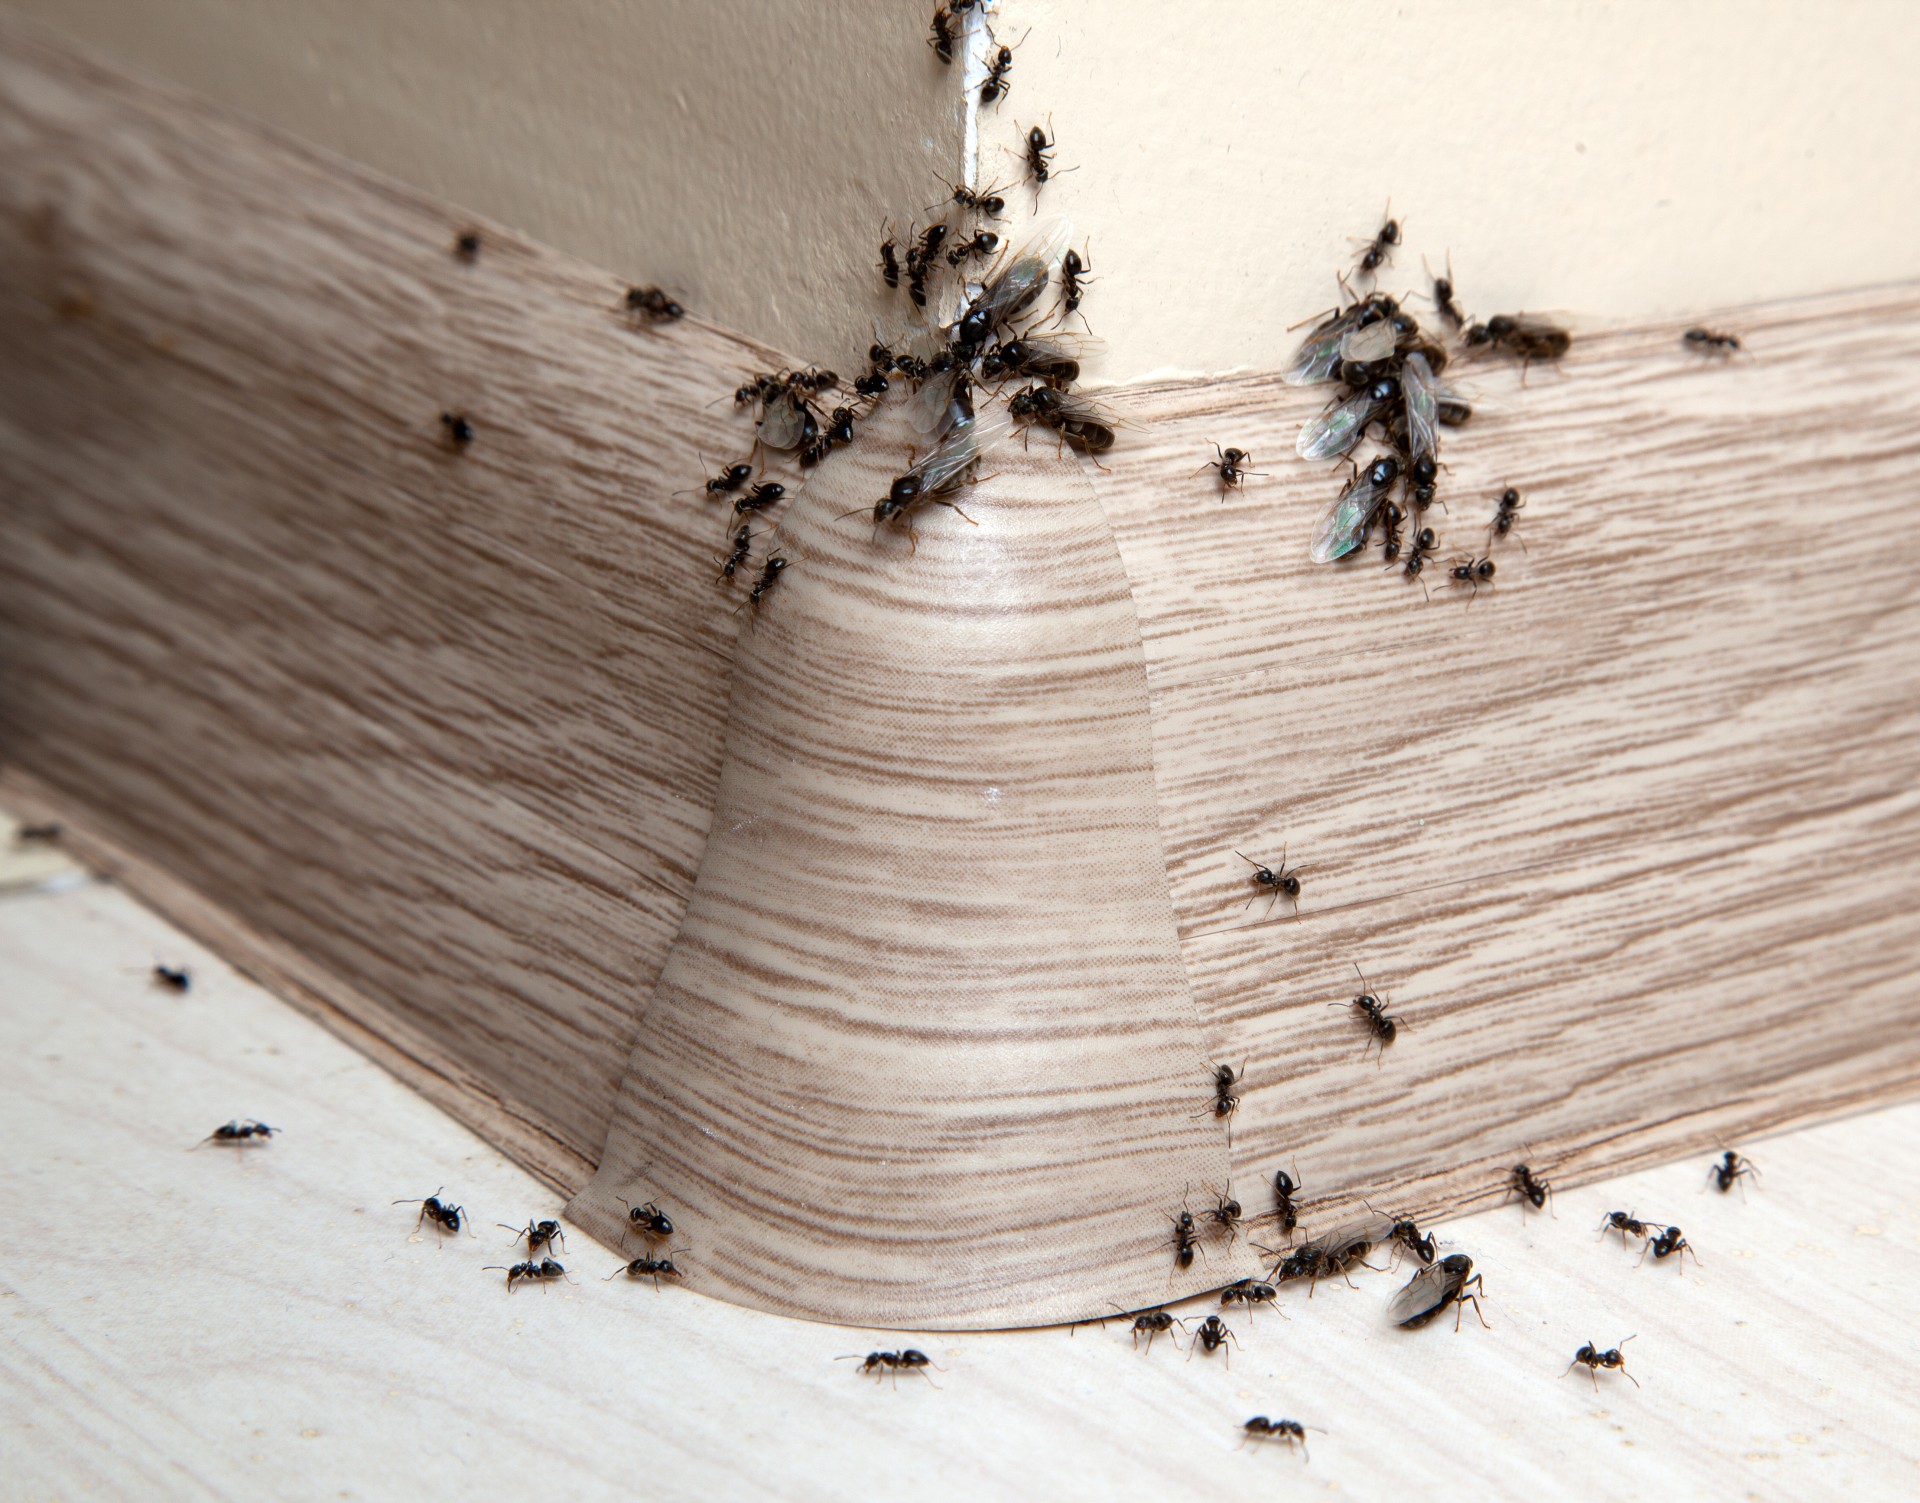 Ant Infestation, Pest Control in Broxbourne, EN10. Call Now 020 8166 9746